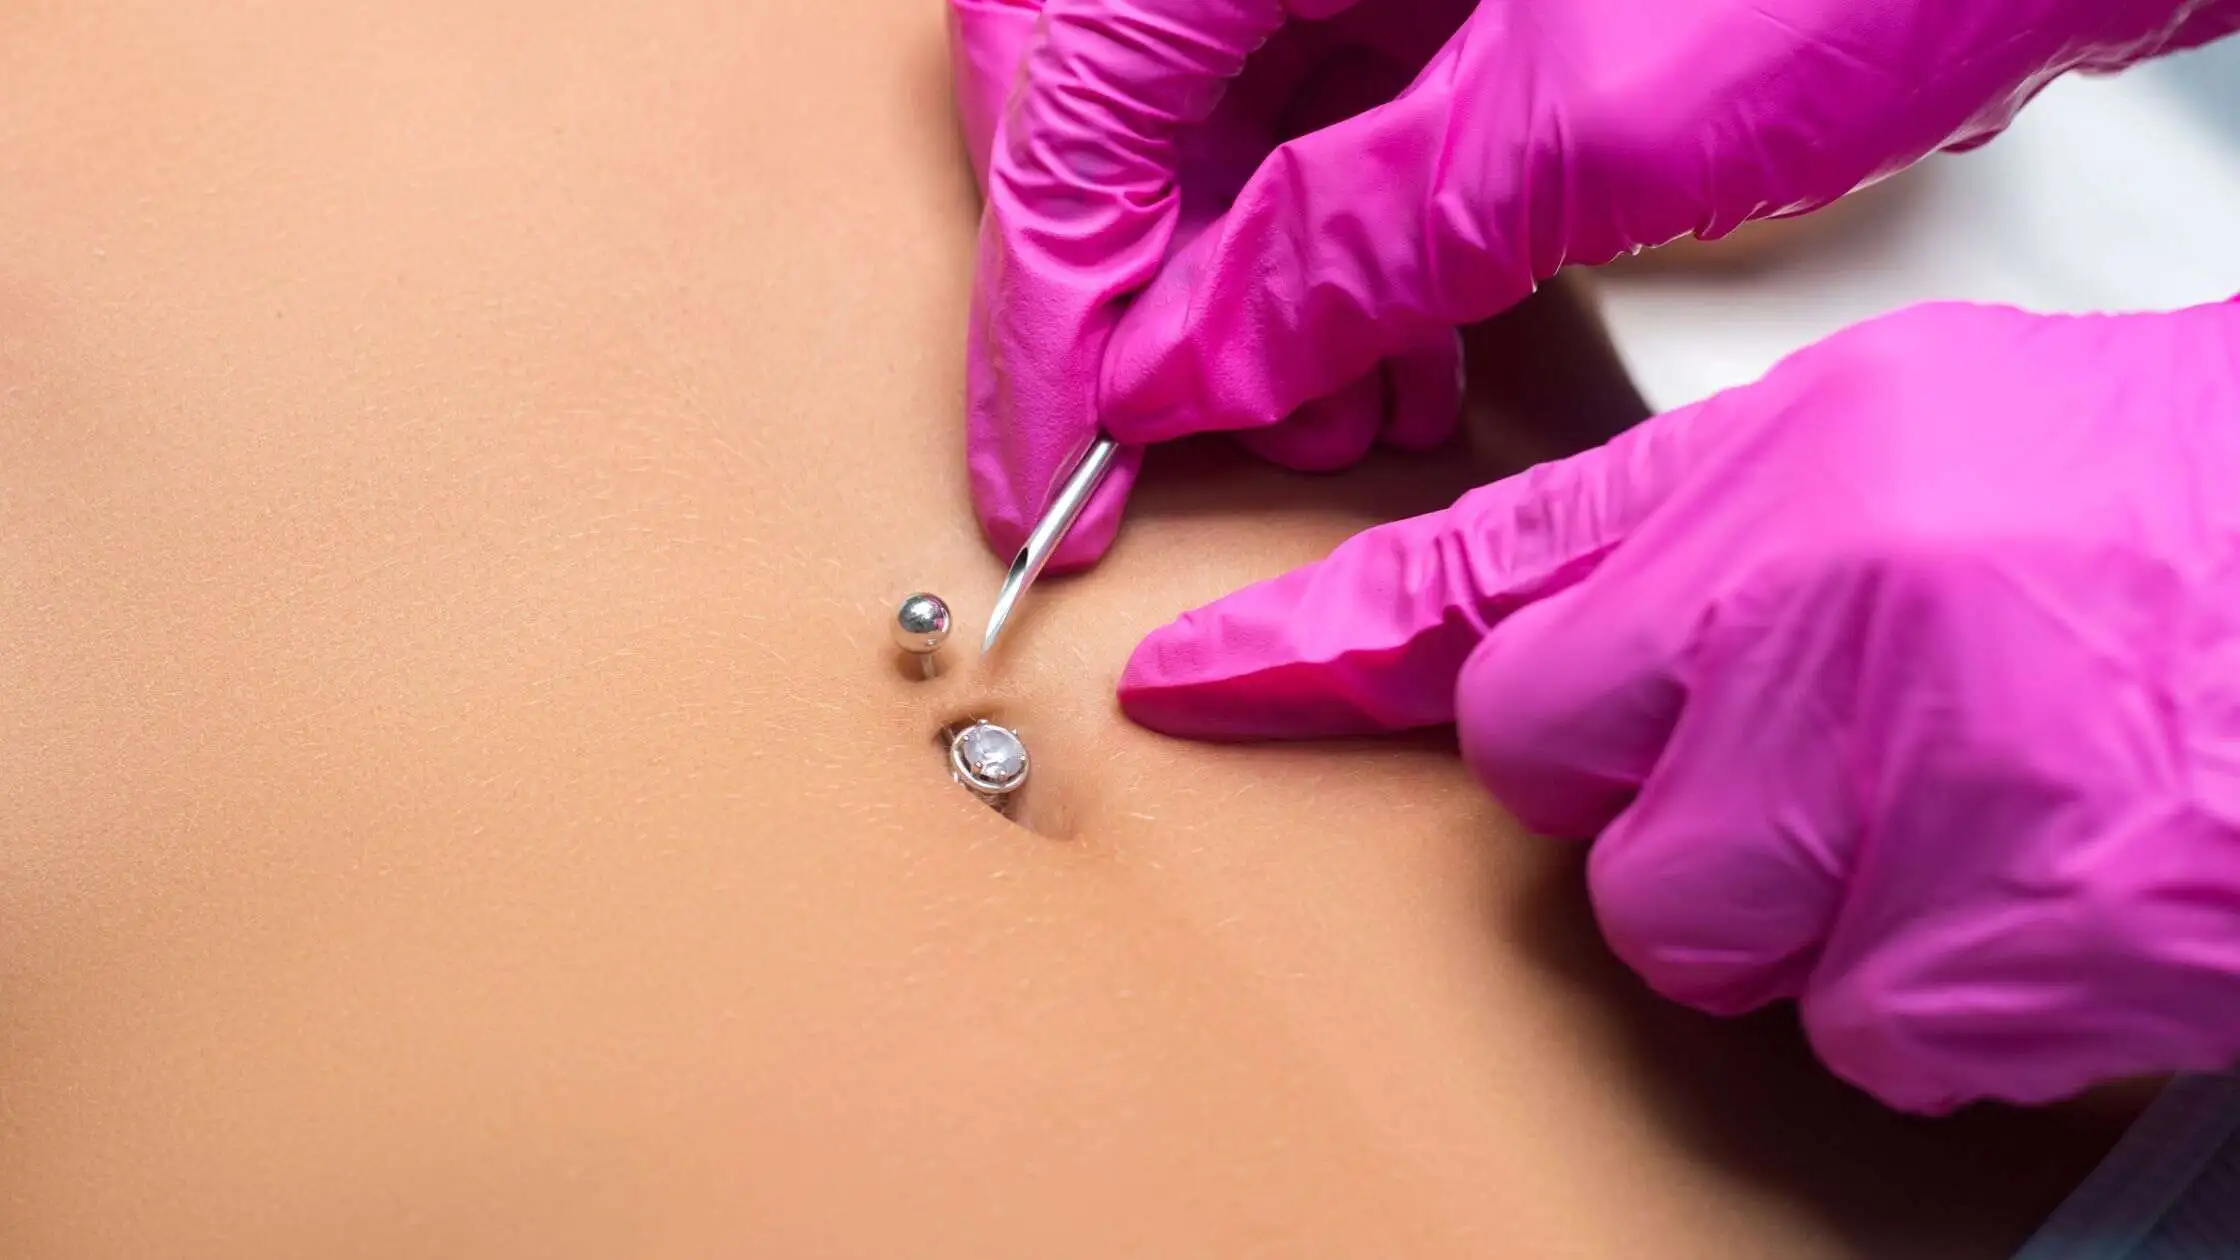 Belly Button Piercing Cost: Budgeting for Stylish Self-Expression